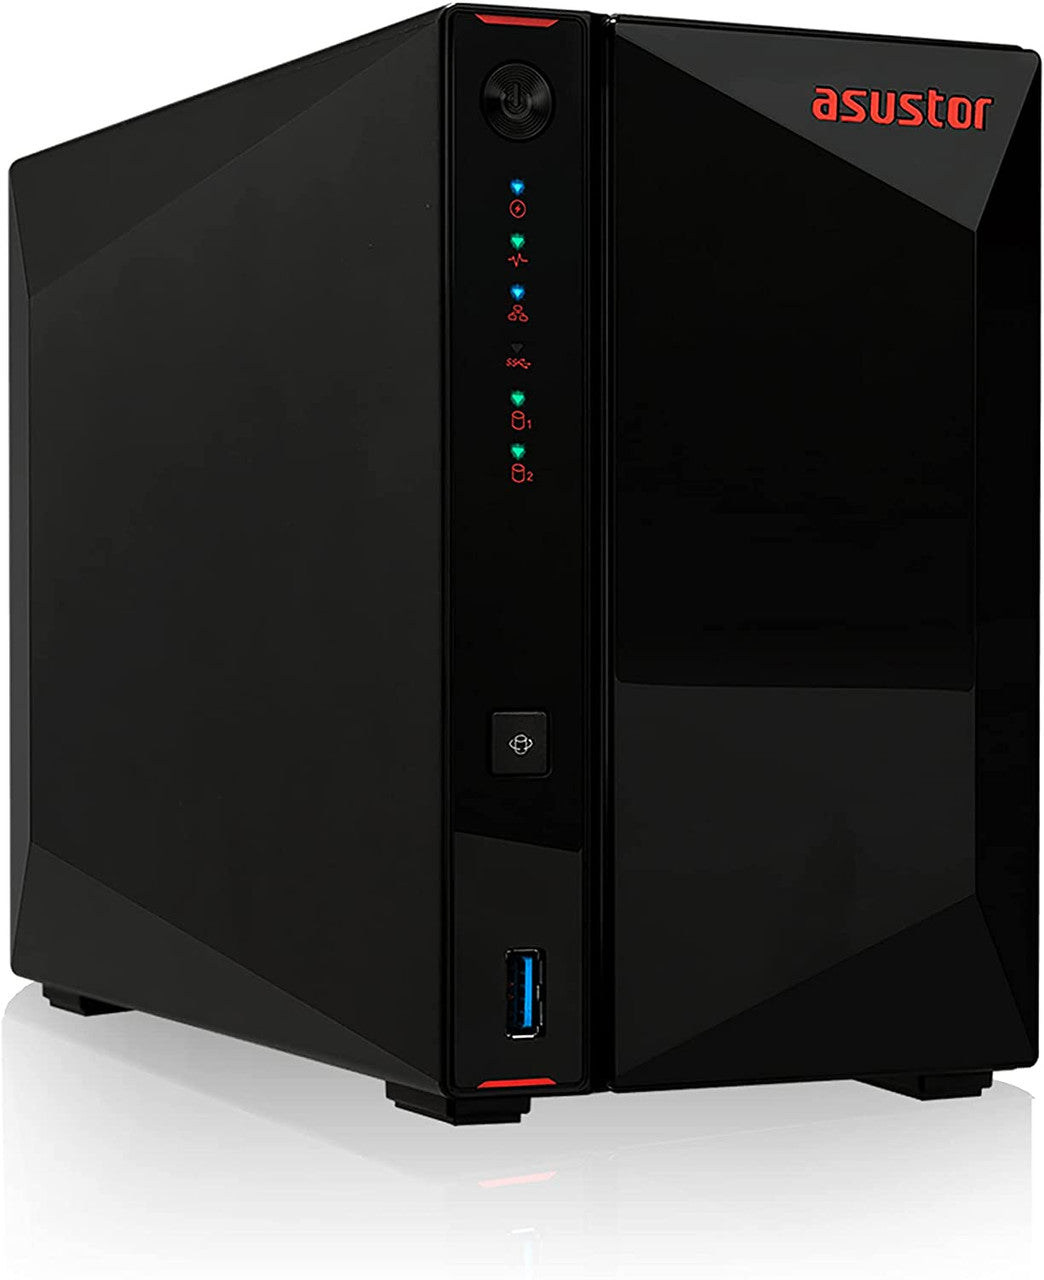 Asustor AS5202T 2-Bay Nimbustor 2 NAS with 8GB RAM and 12TB (2 x 6TB) Western Digital RED Plus Drives Fully Assembled and Tested